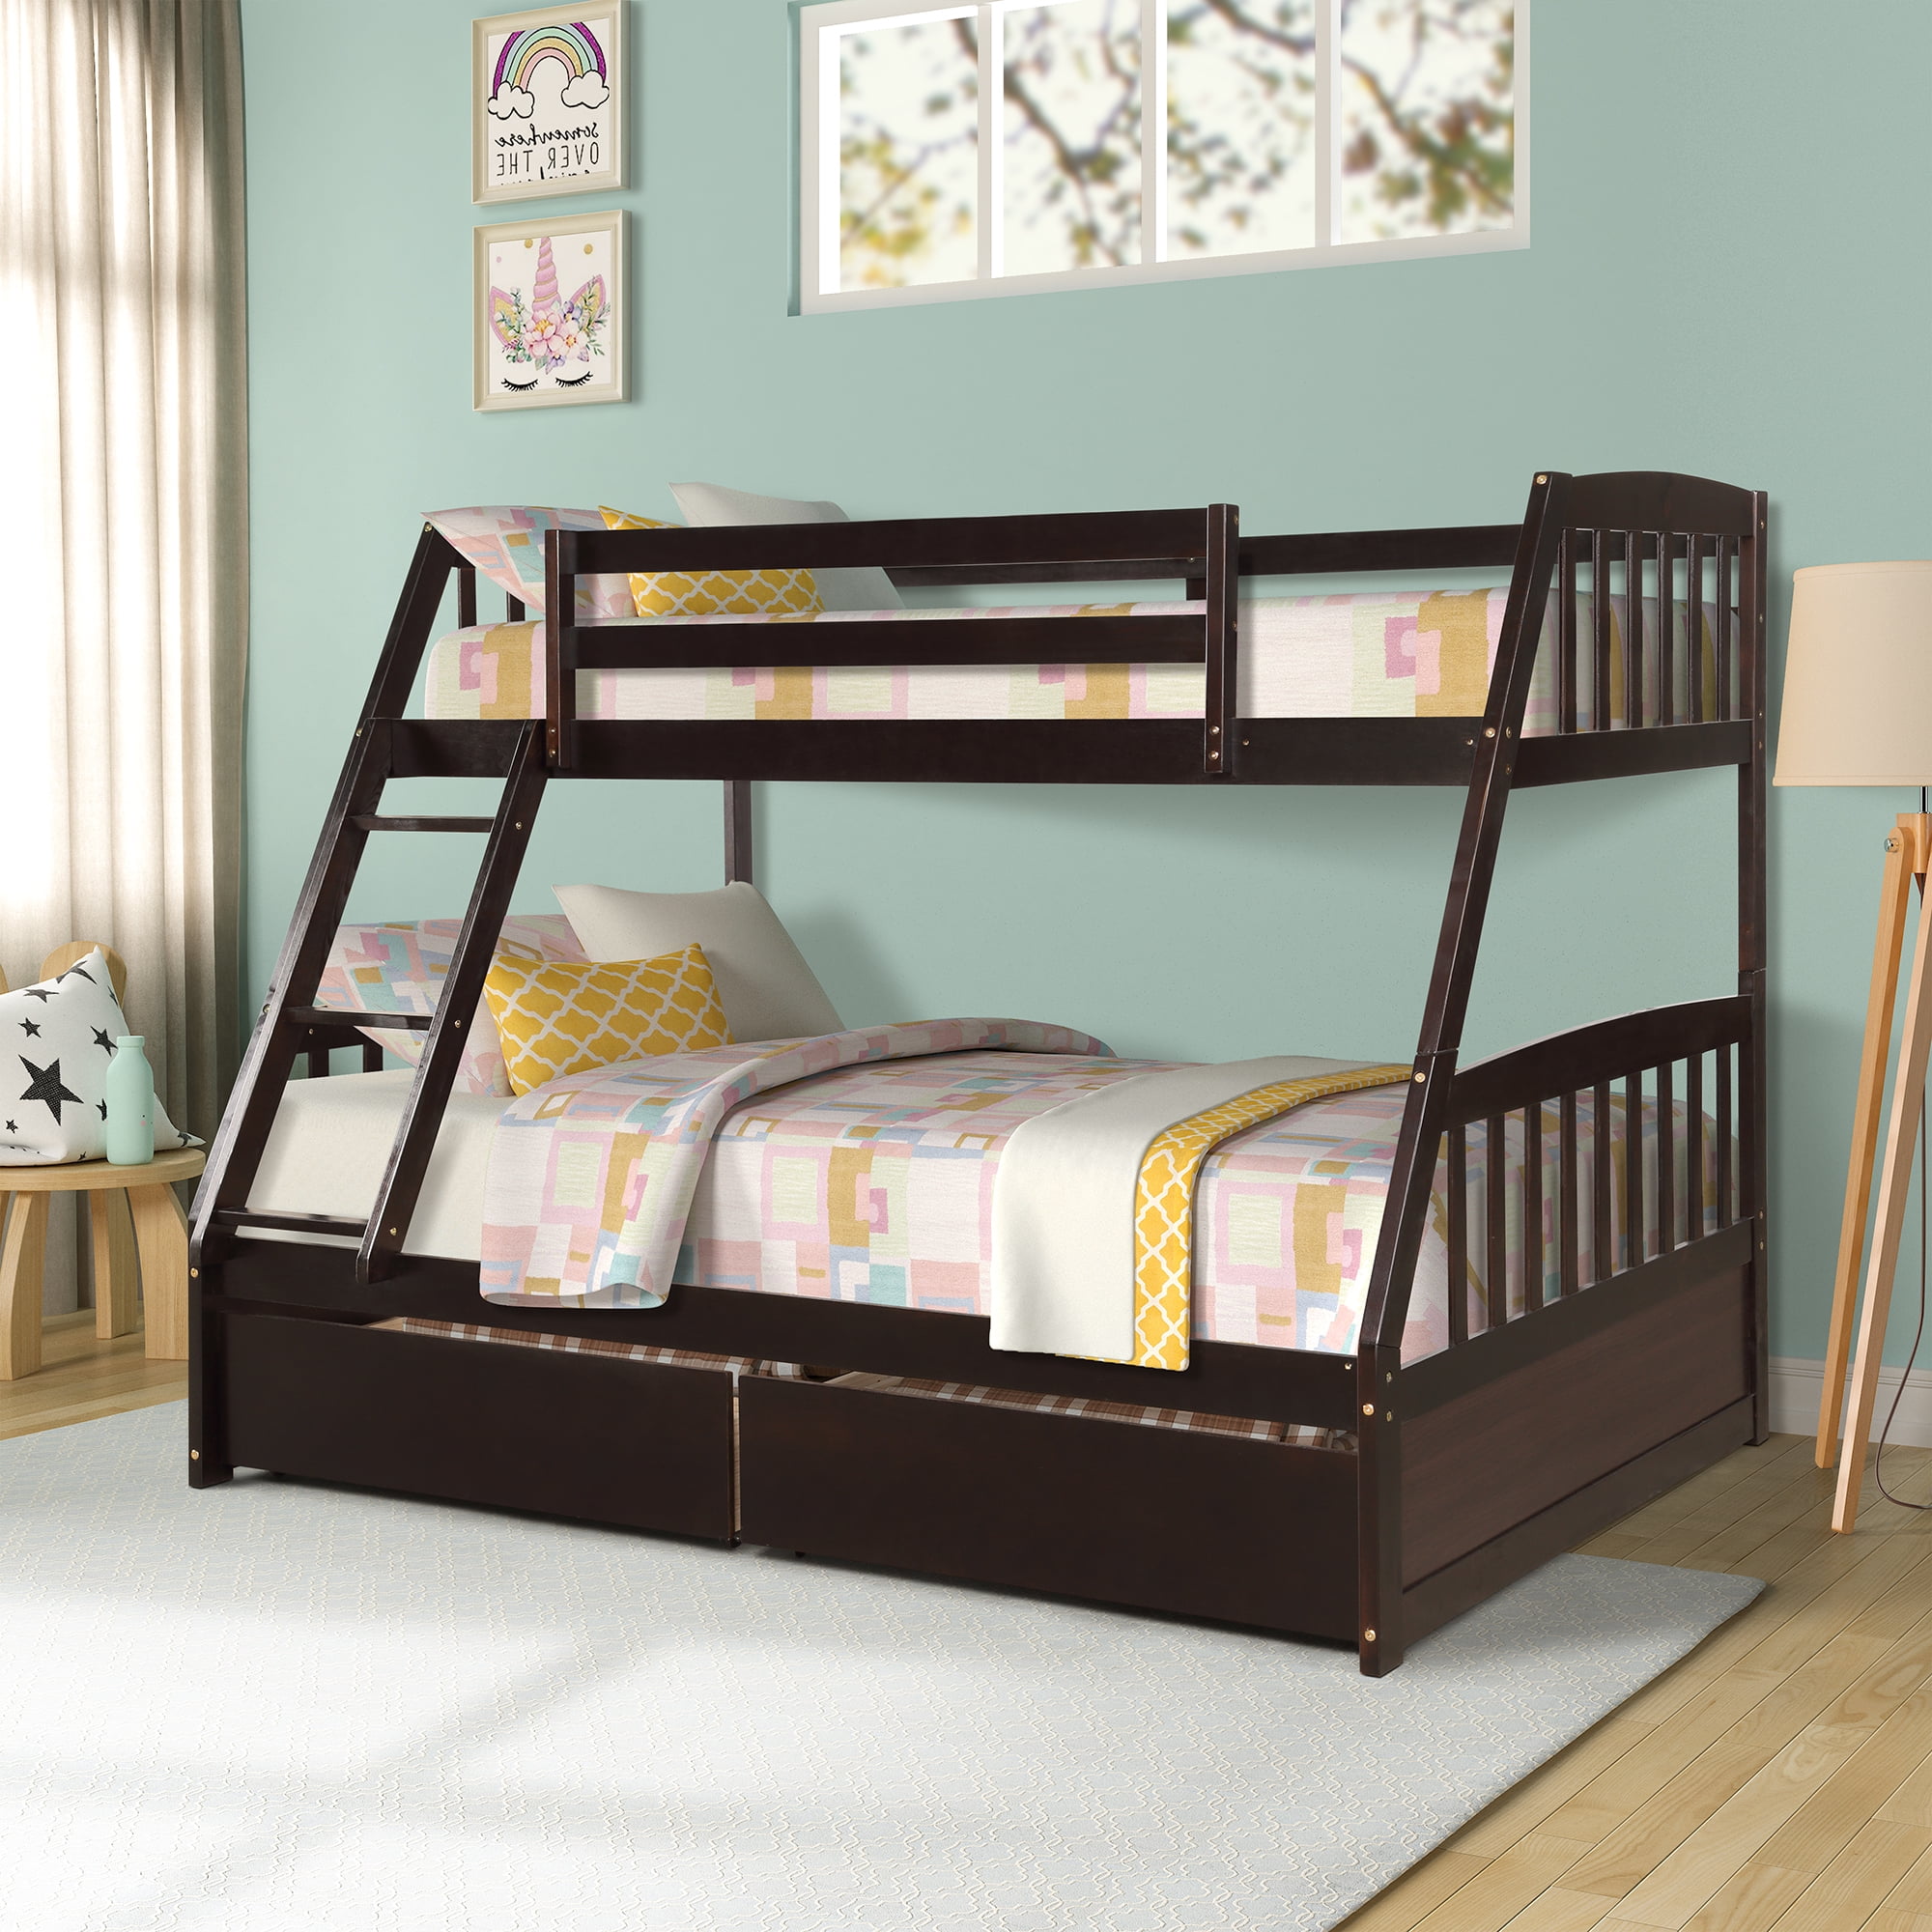 Loft Bed Solid Wood Twin Over Full Bunk, Clearance Bunk Beds Twin Over Full